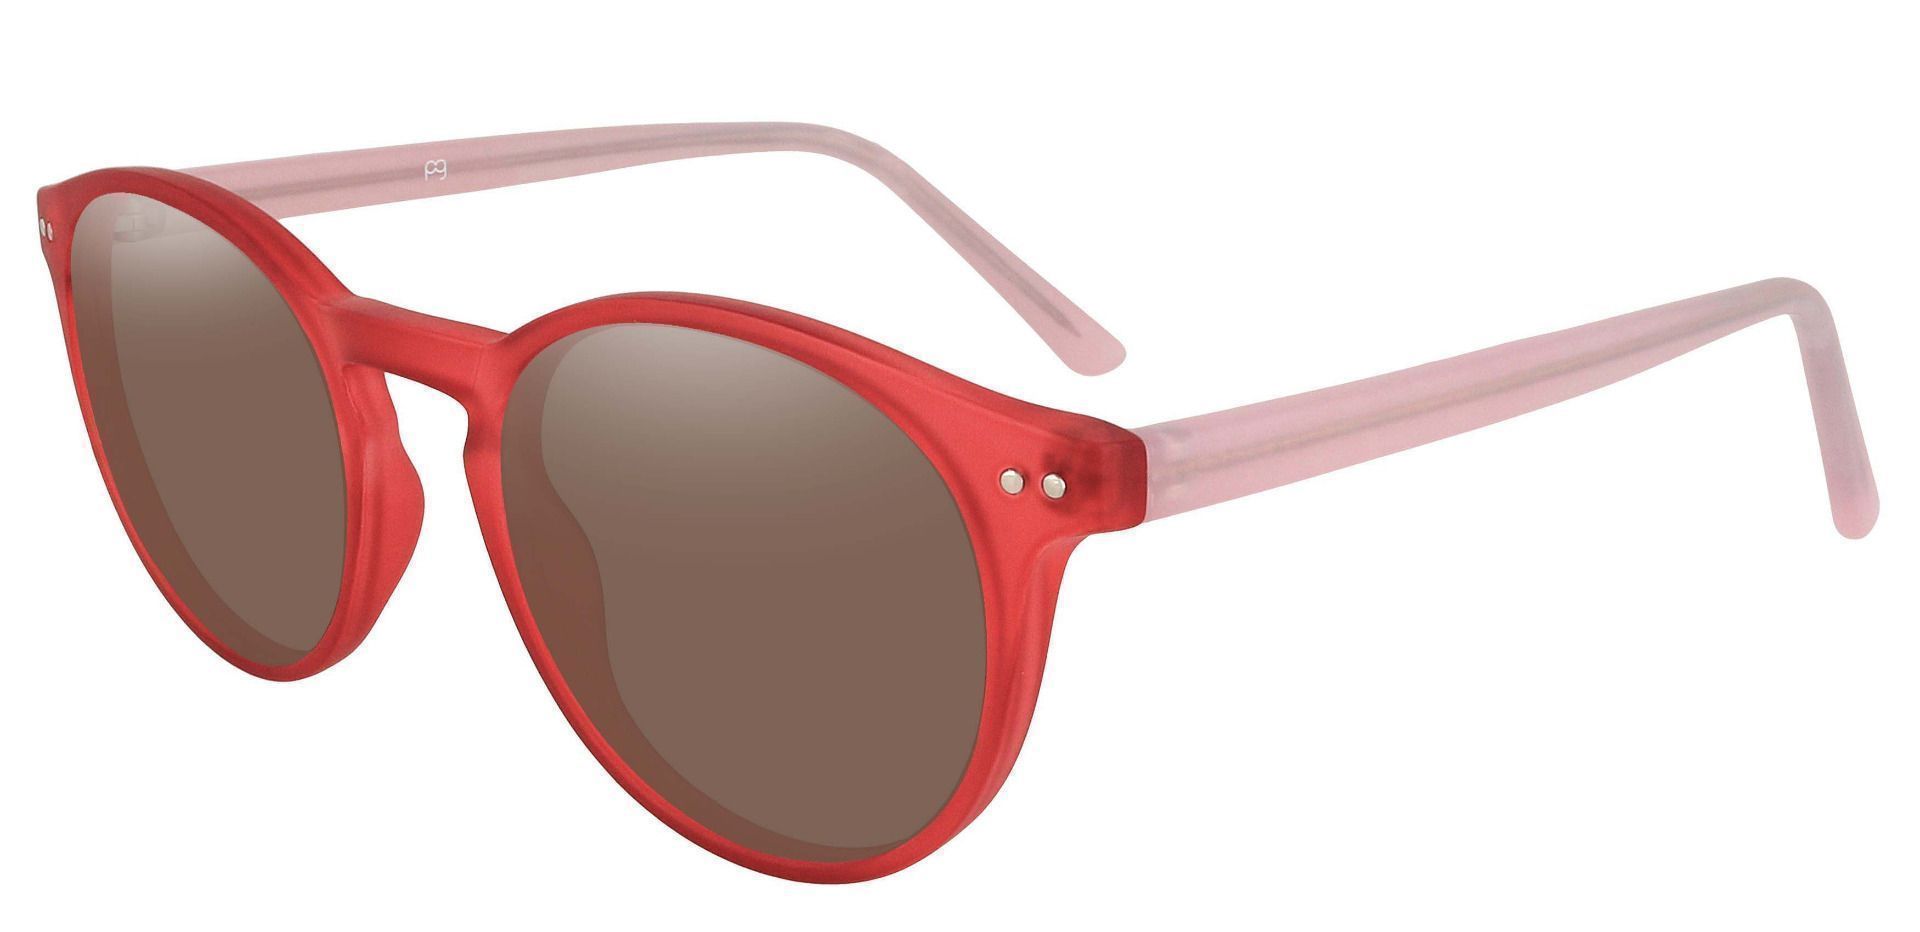 Harmony Oval Prescription Sunglasses - Red Frame With Brown Lenses